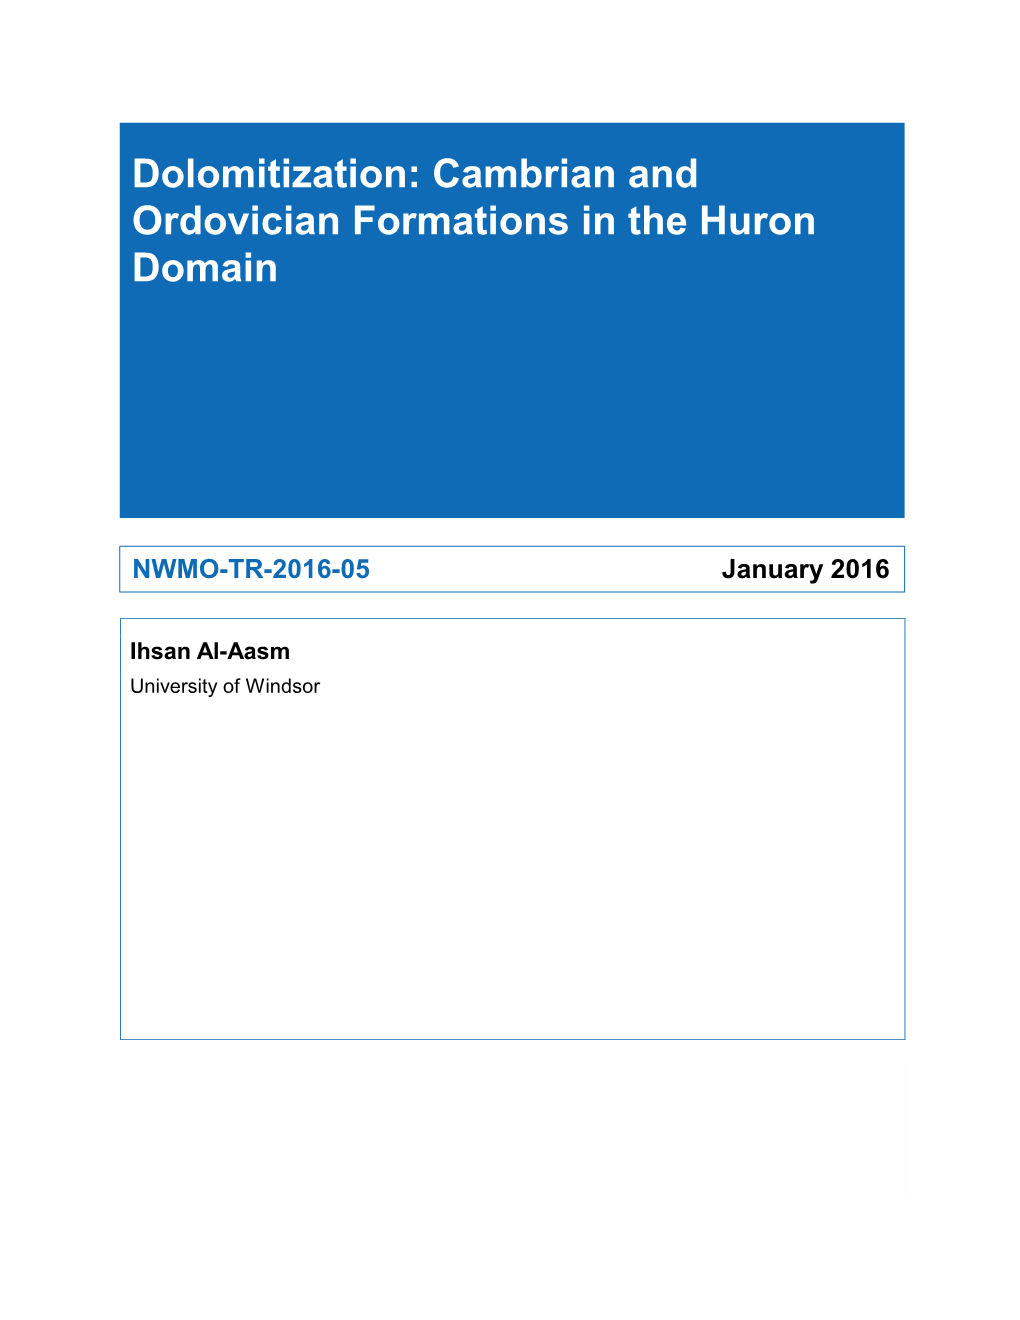 Dolomitization: Cambrian and Ordovician Formations in the Huron Domain